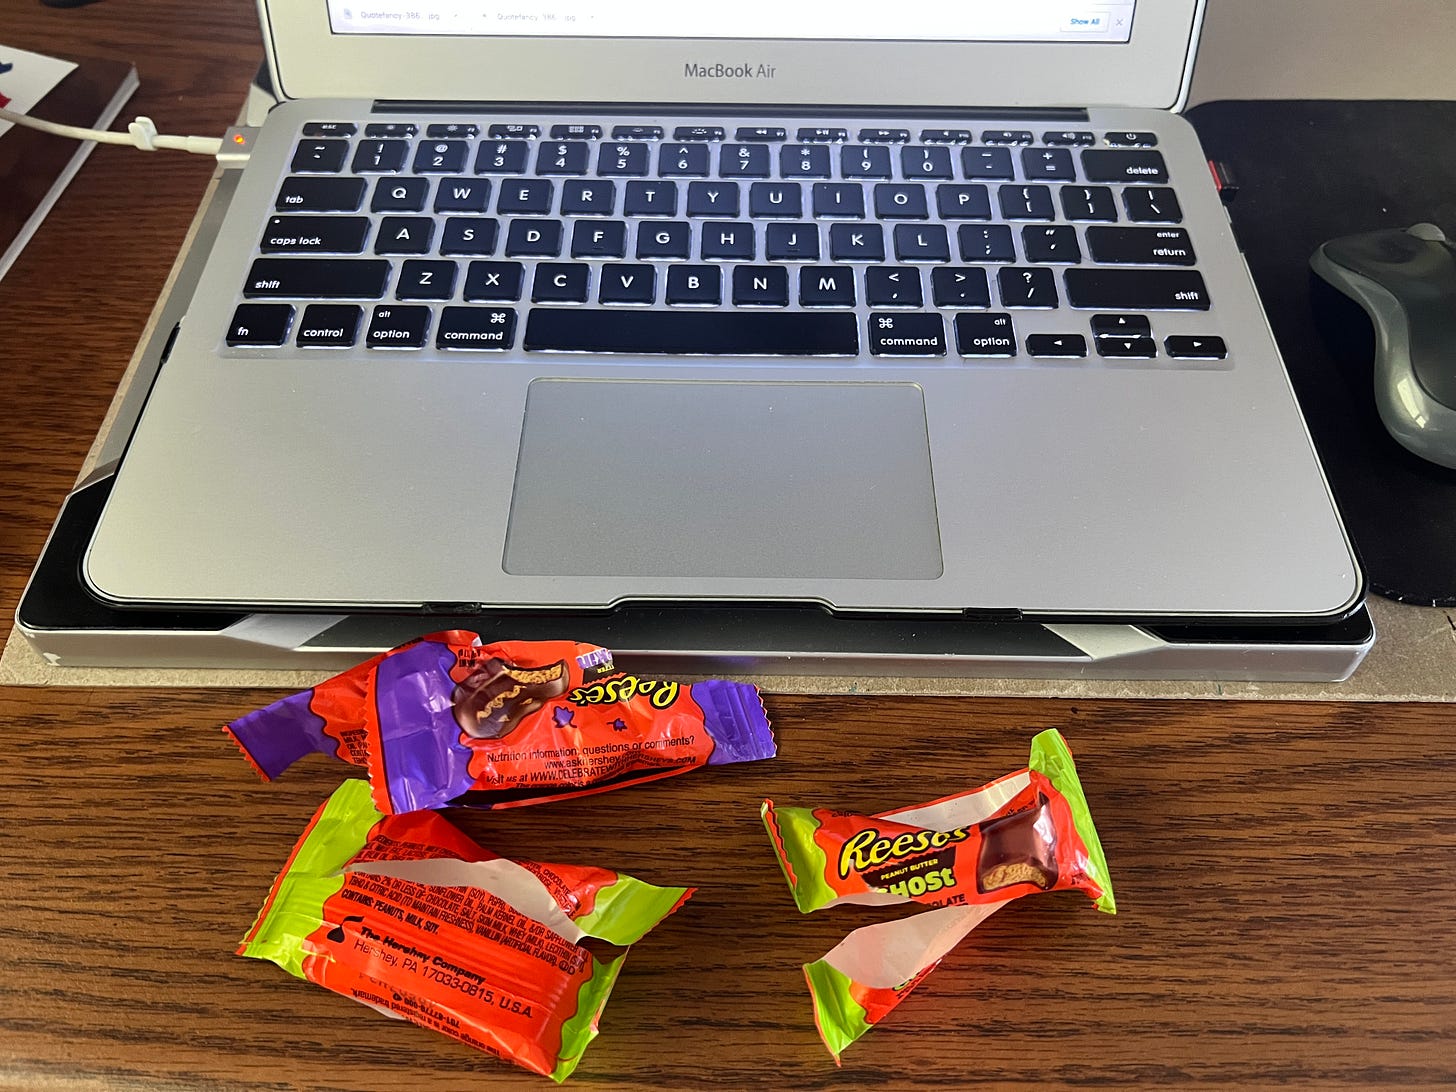 Laptop on desk with three empty wrappers of fun-size Reese's peanut butter Halloween figures.